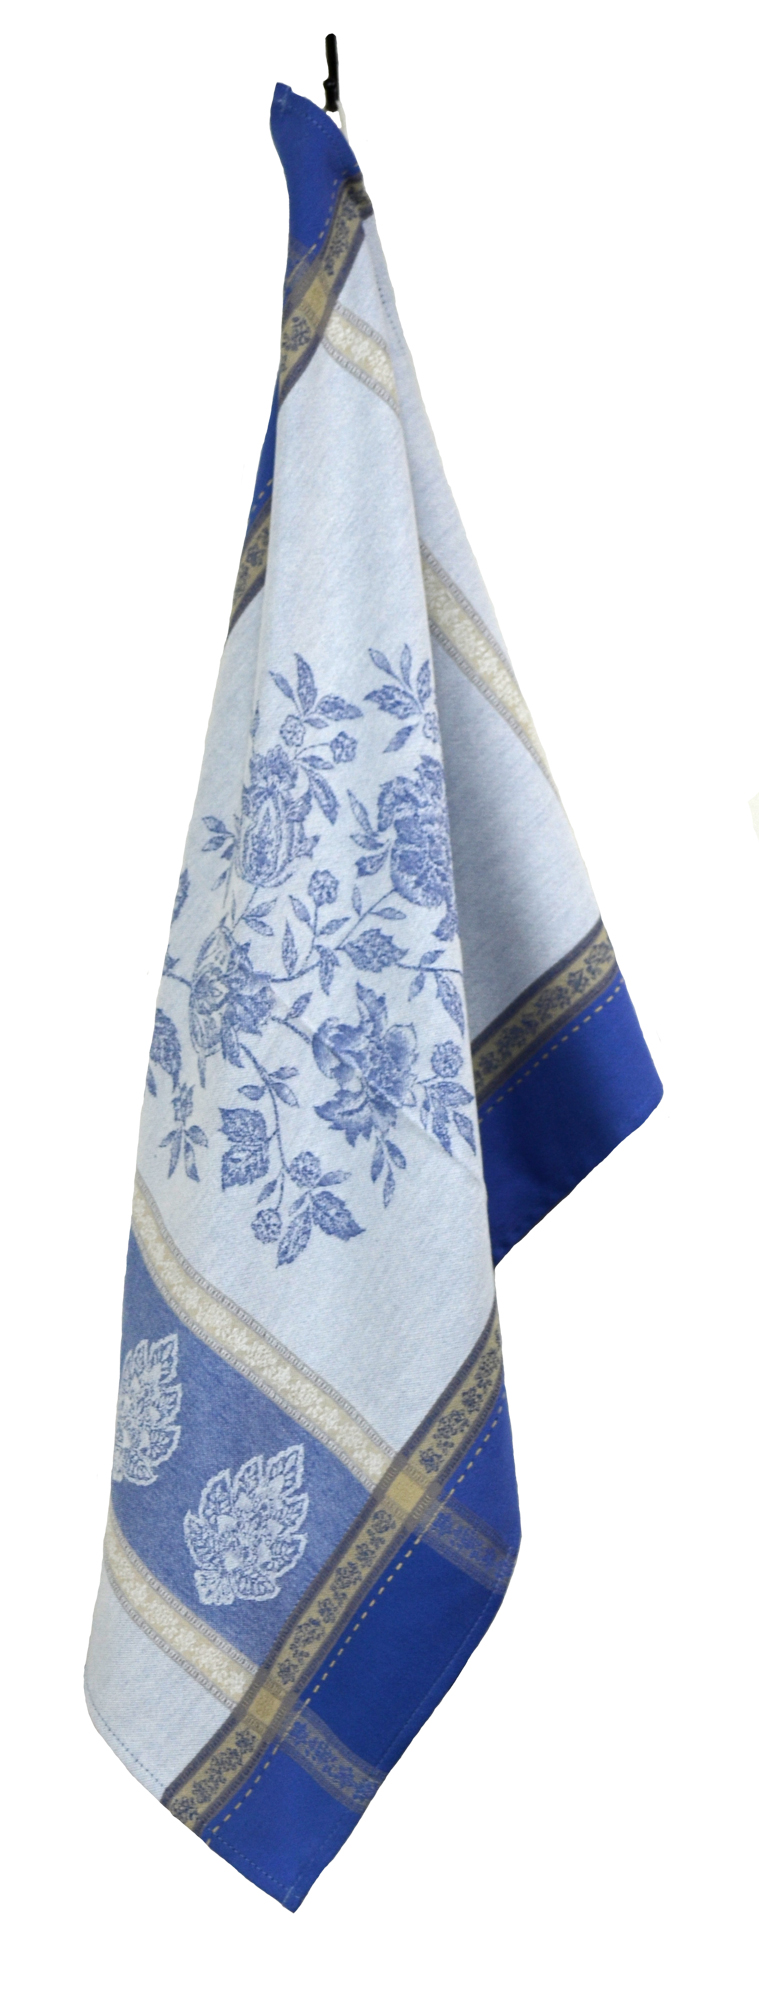 Floral French Jacquard Tea Towel - Collection "Caprice" Cream/Blue, Size: 20 x 27 inches, Price CAN$19.95